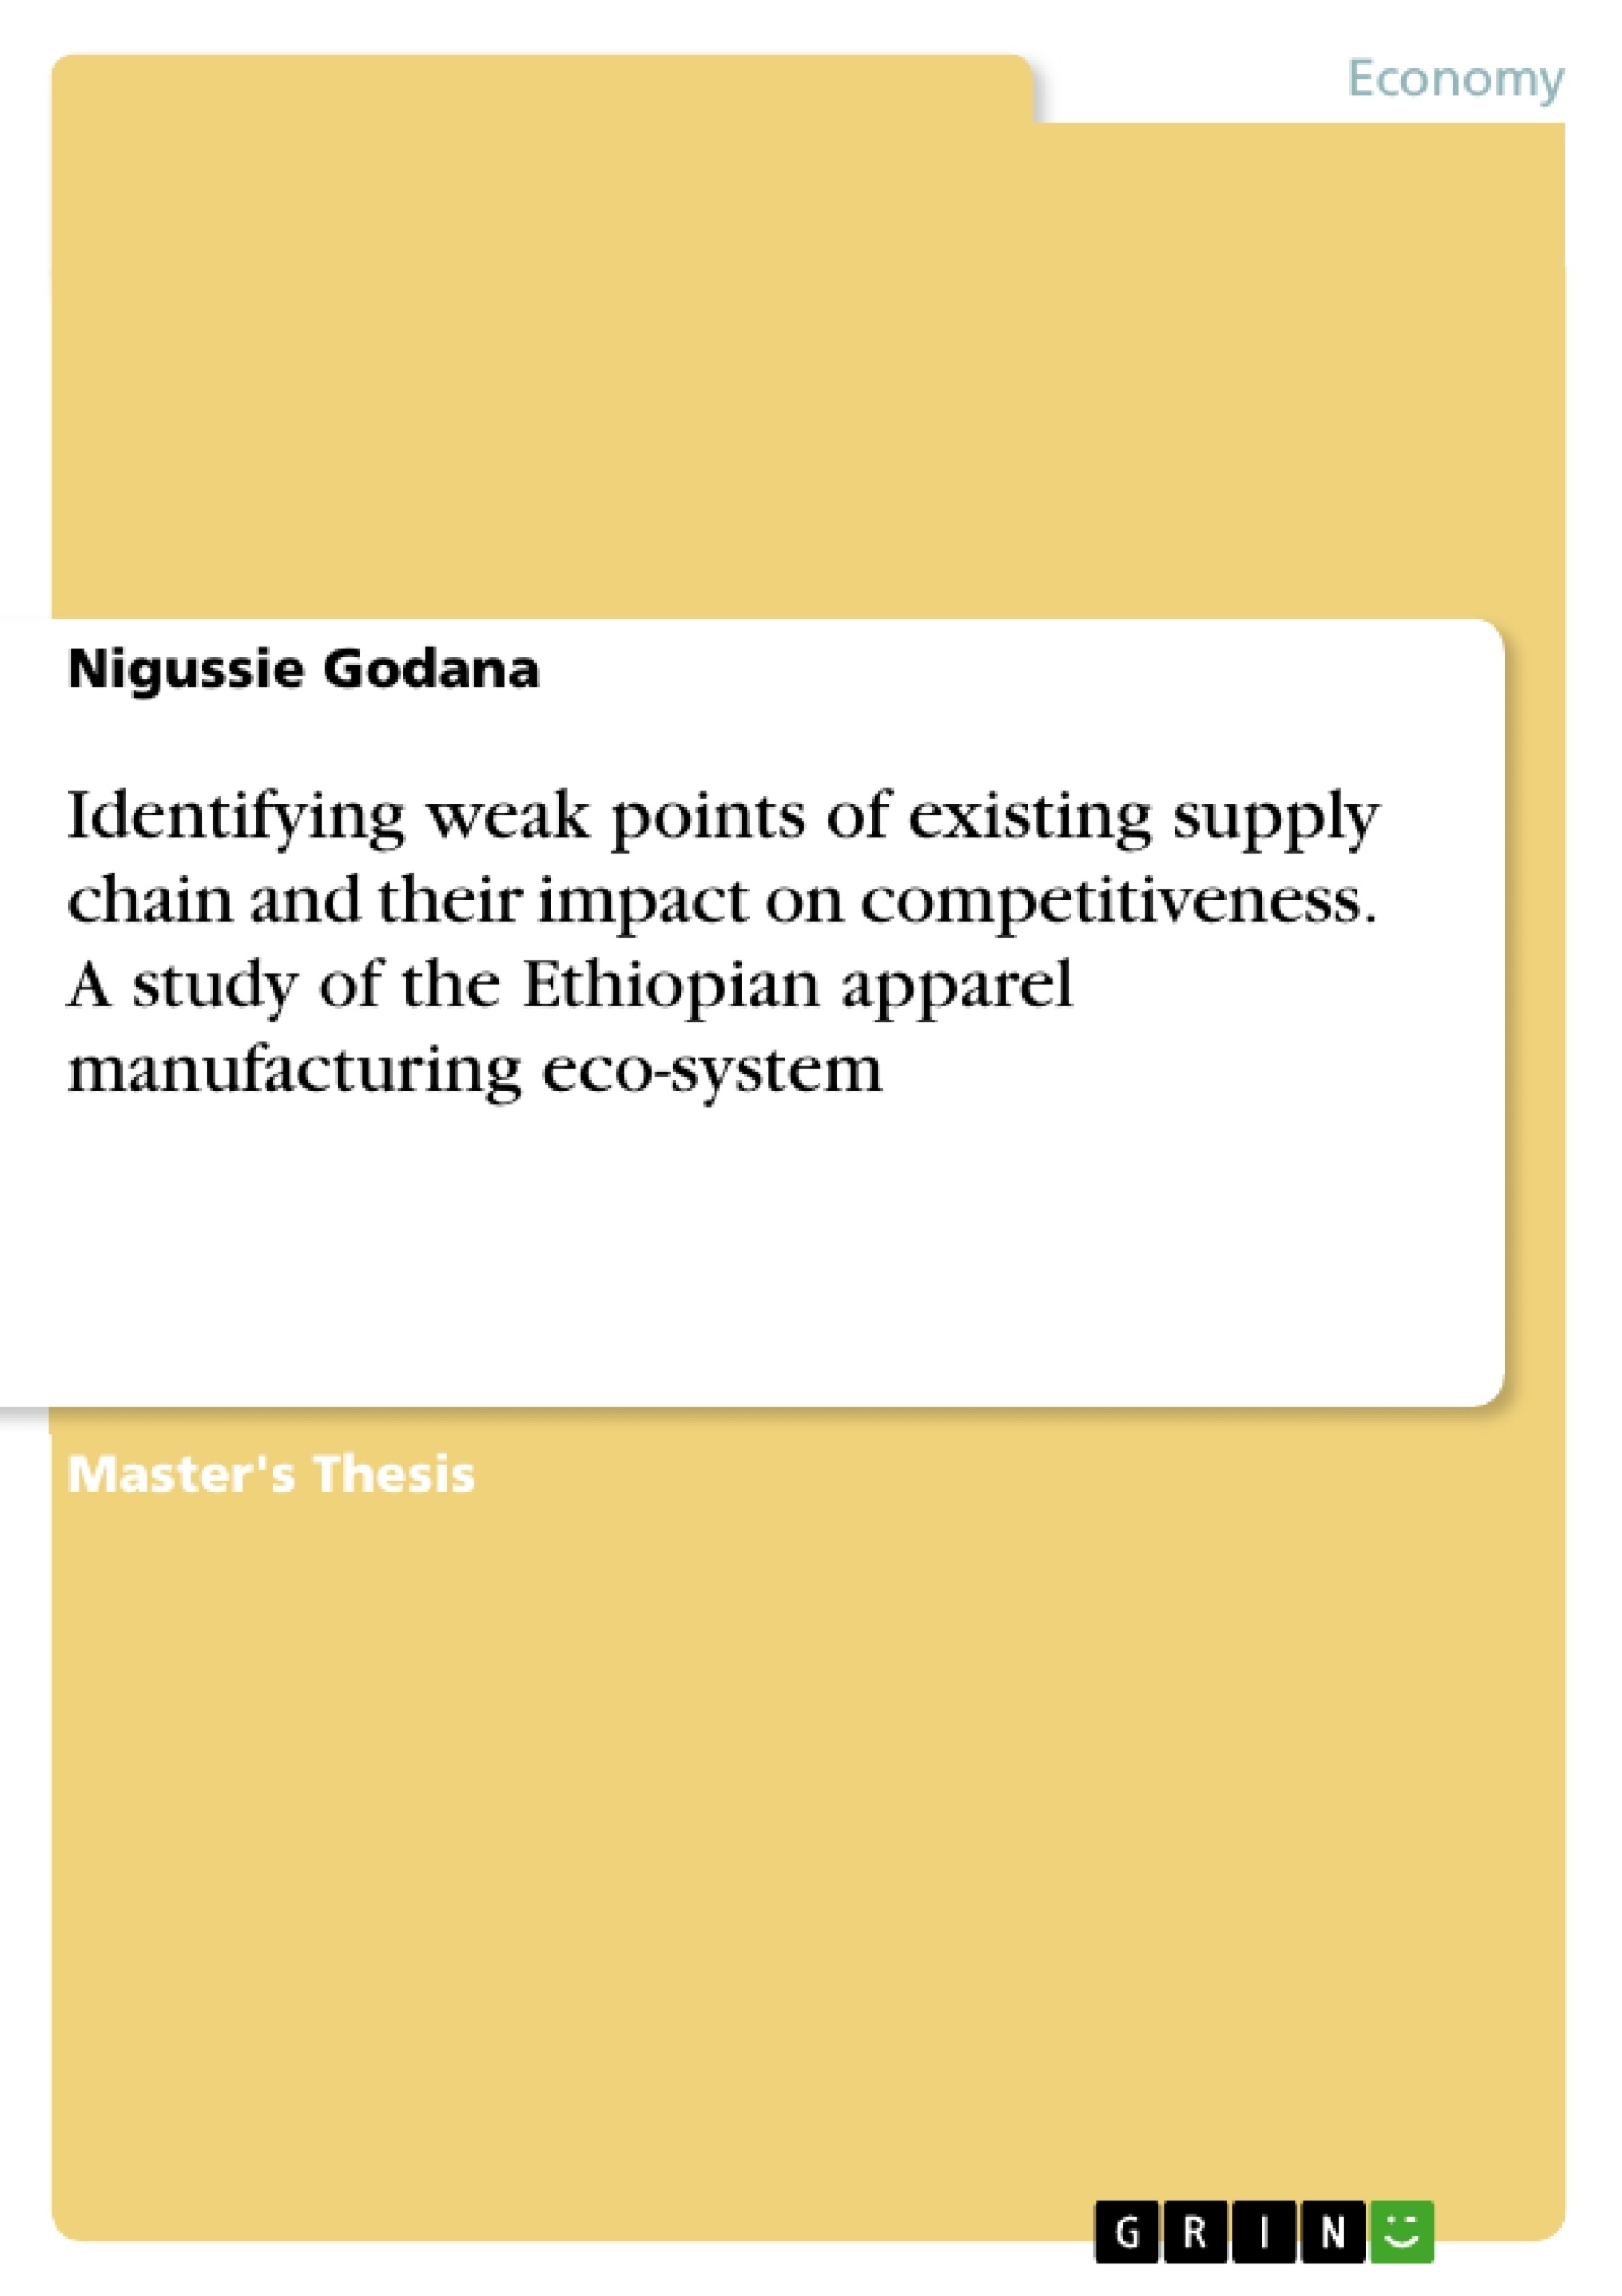 Title: Identifying weak points of existing supply chain and their impact on competitiveness. A study of the Ethiopian apparel manufacturing eco-system